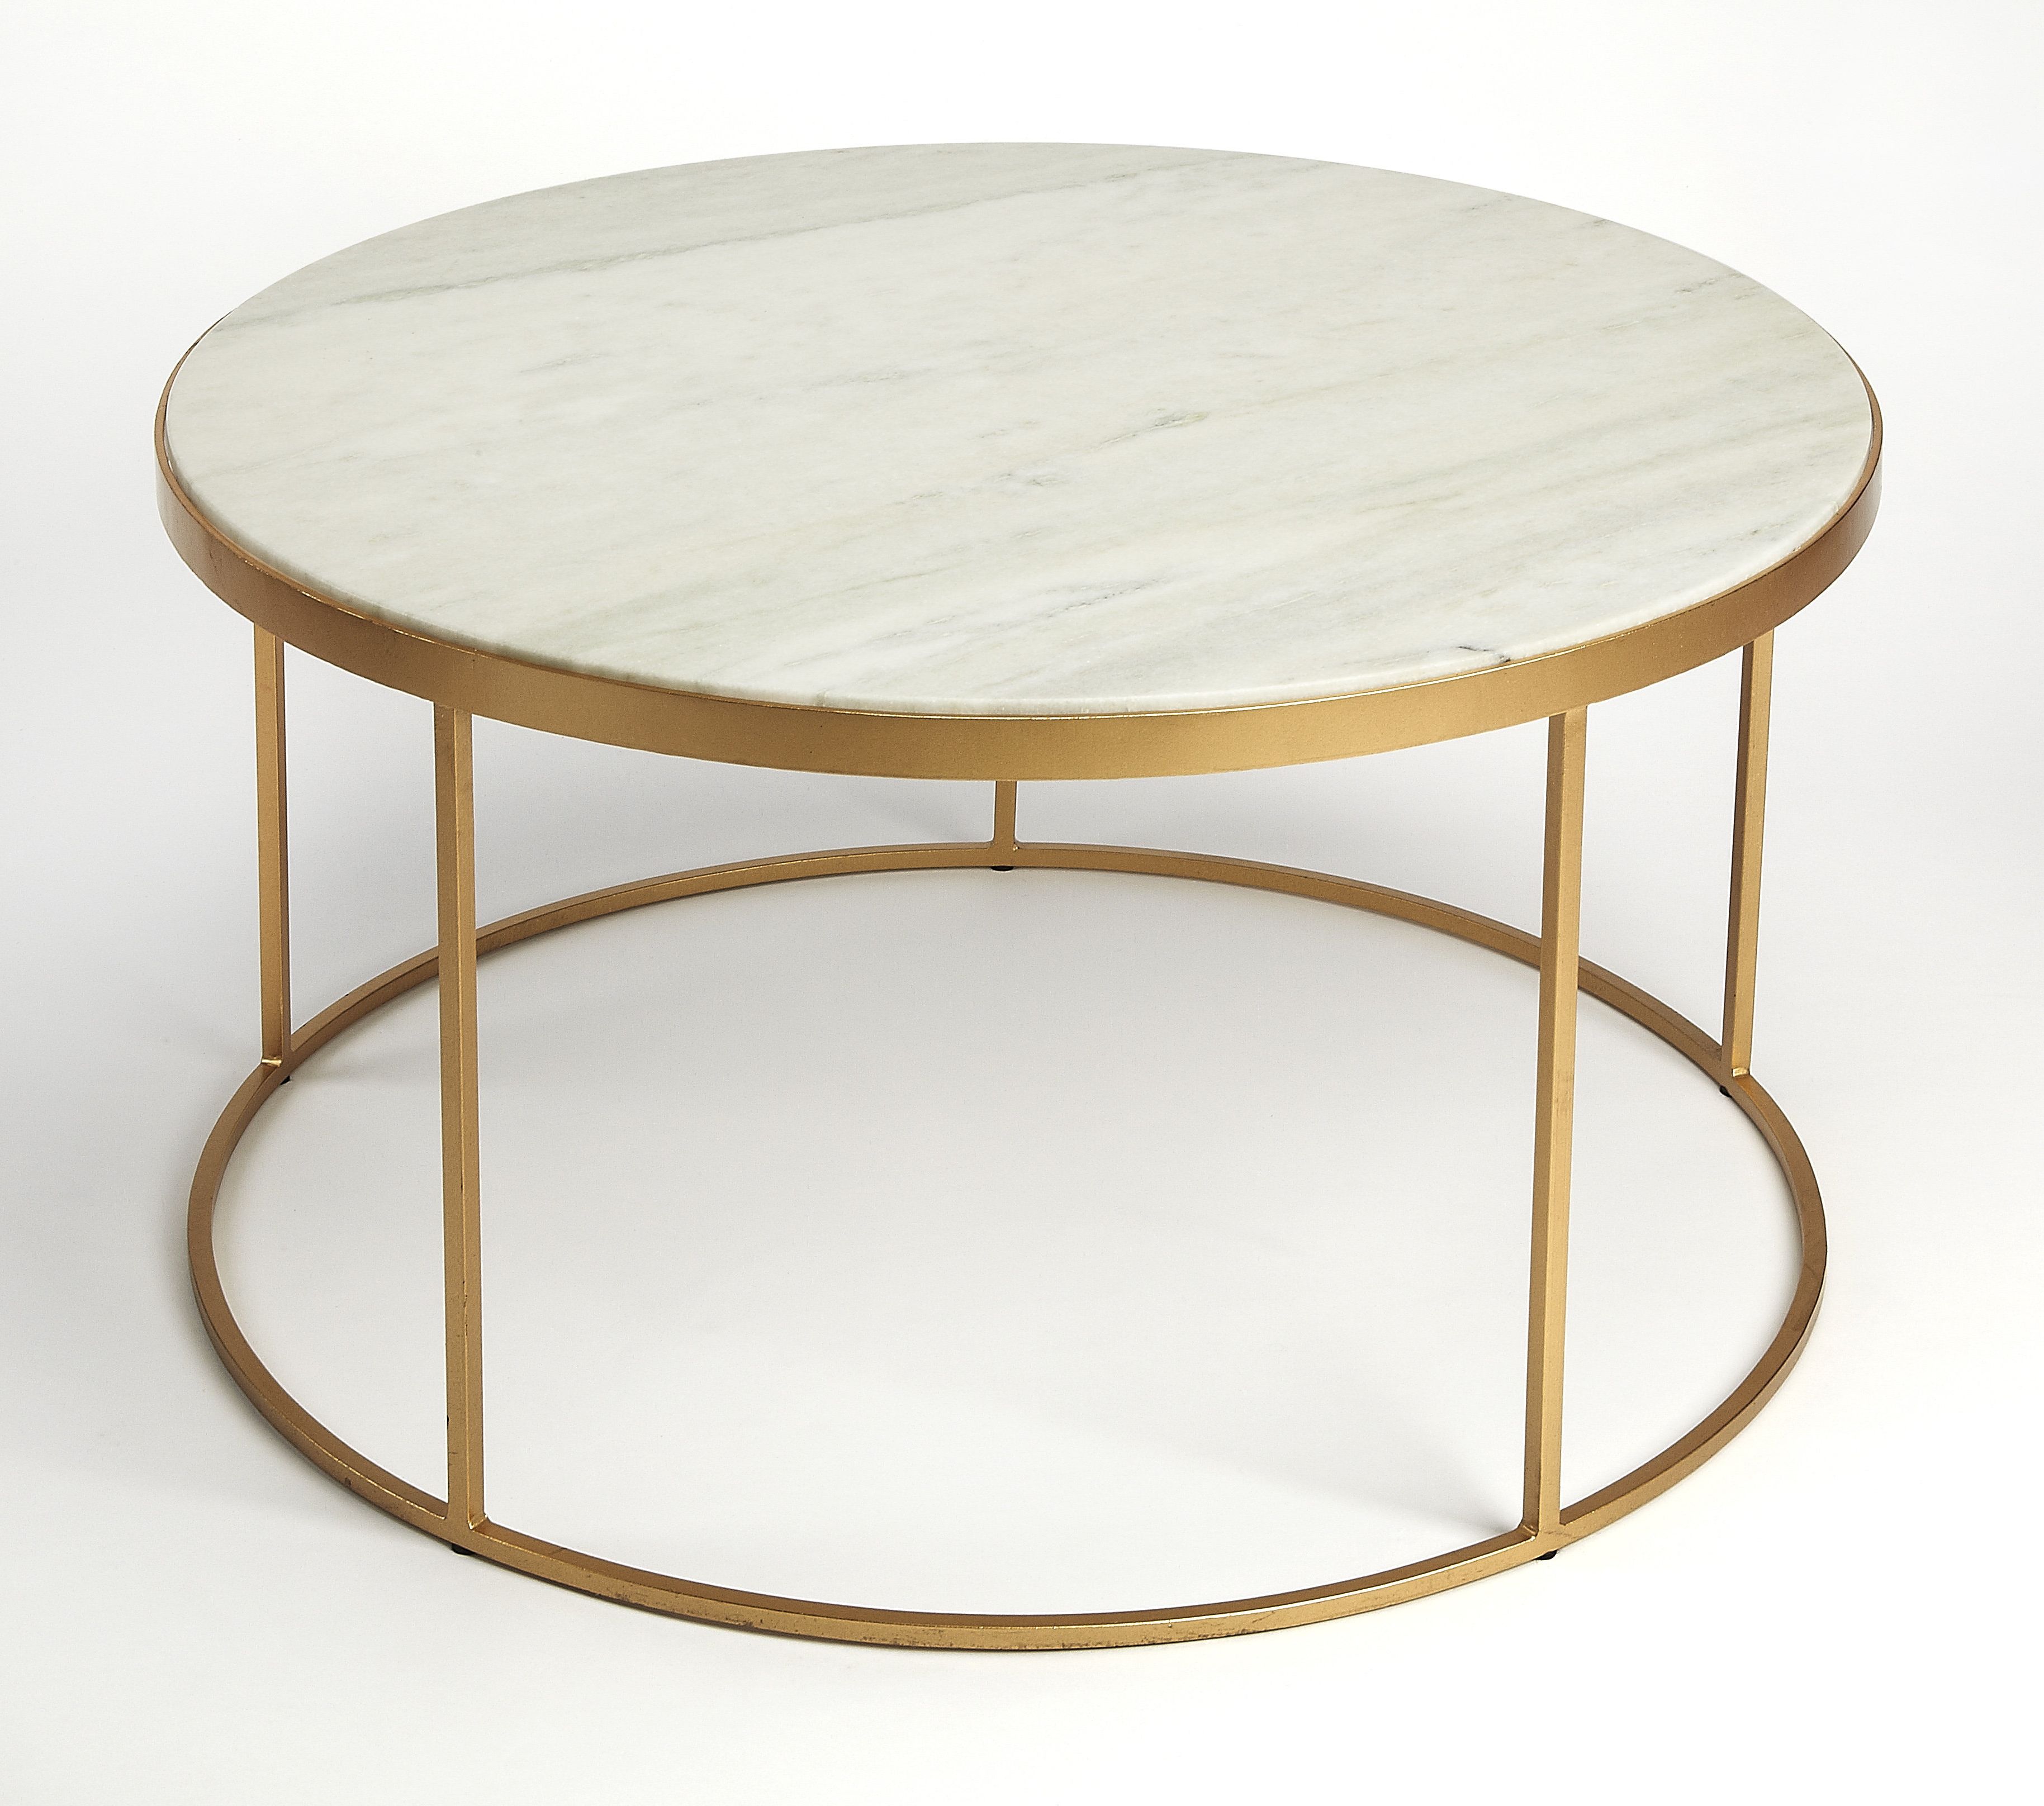 Wayfair Pertaining To Elke Marble Console Tables With Polished Aluminum Base (View 20 of 20)